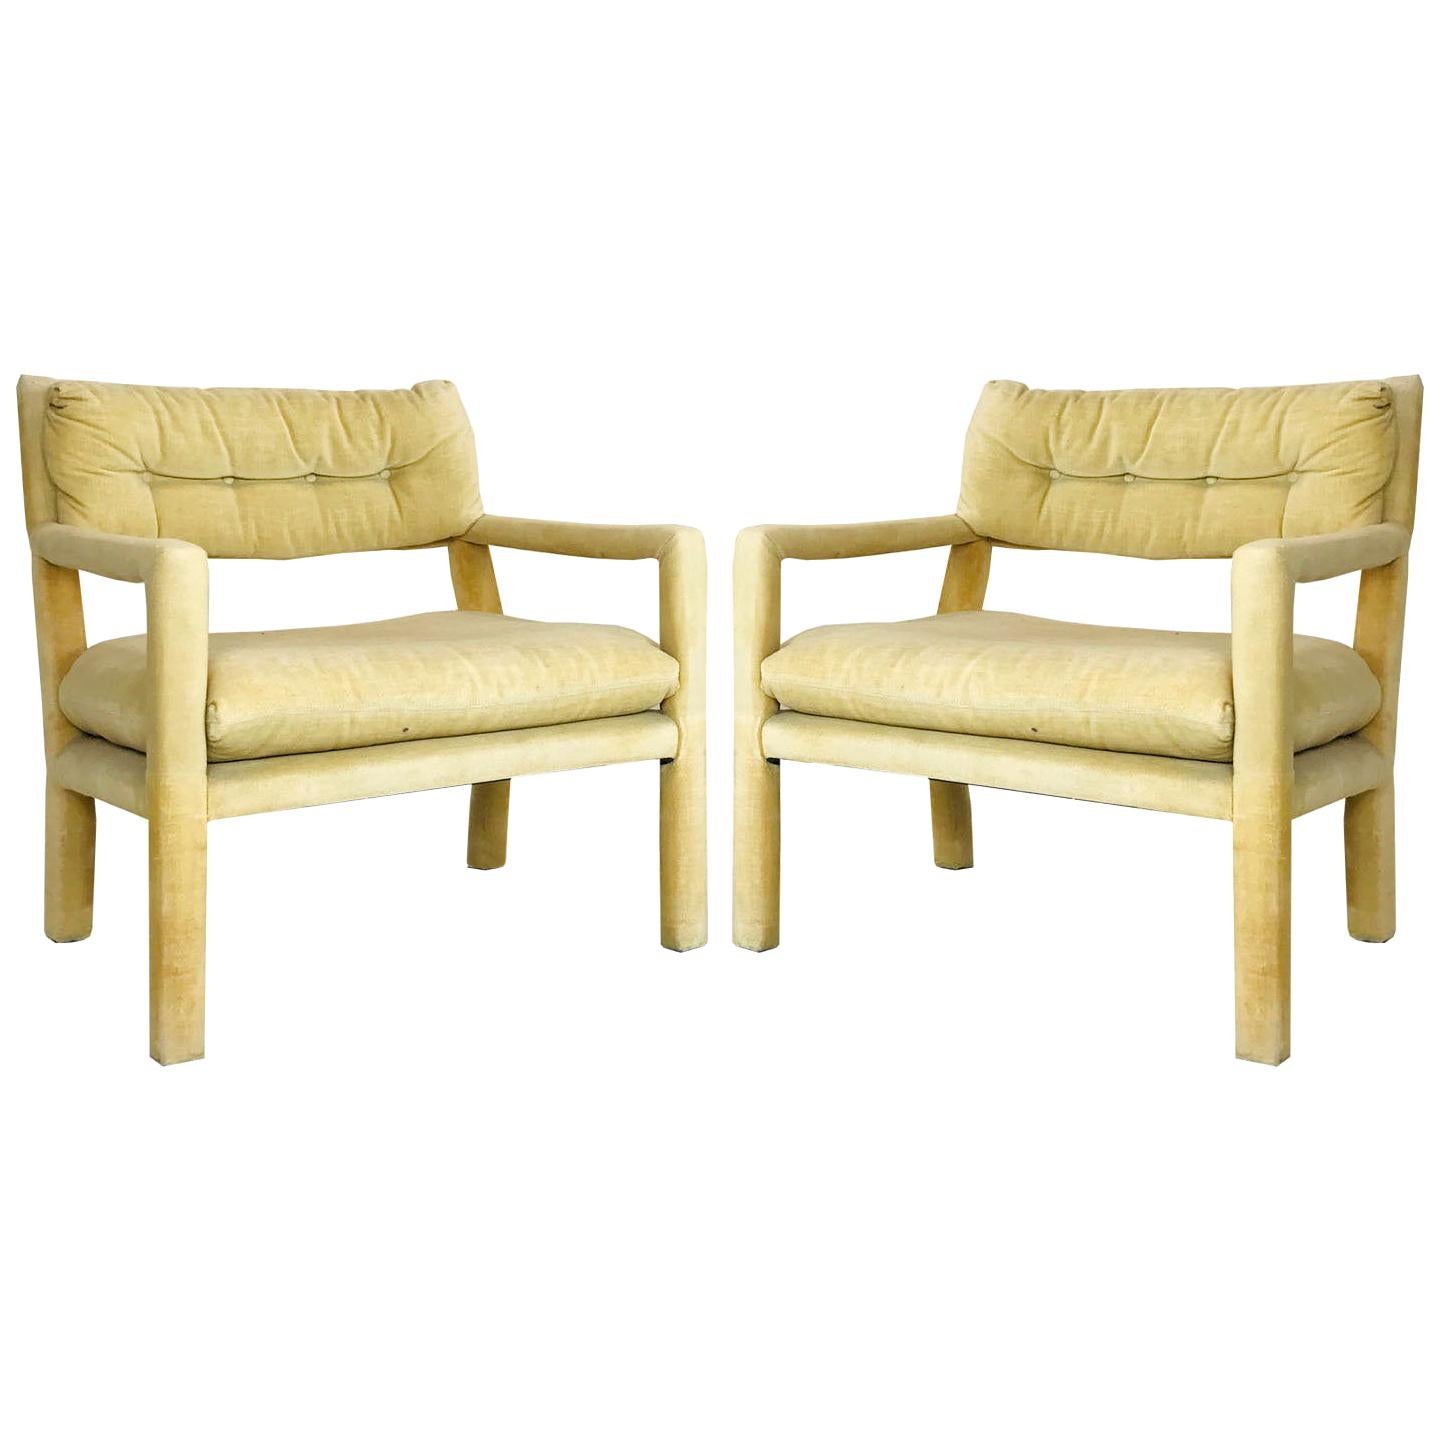 Pair of Milo Baughman Style Parsons Chairs